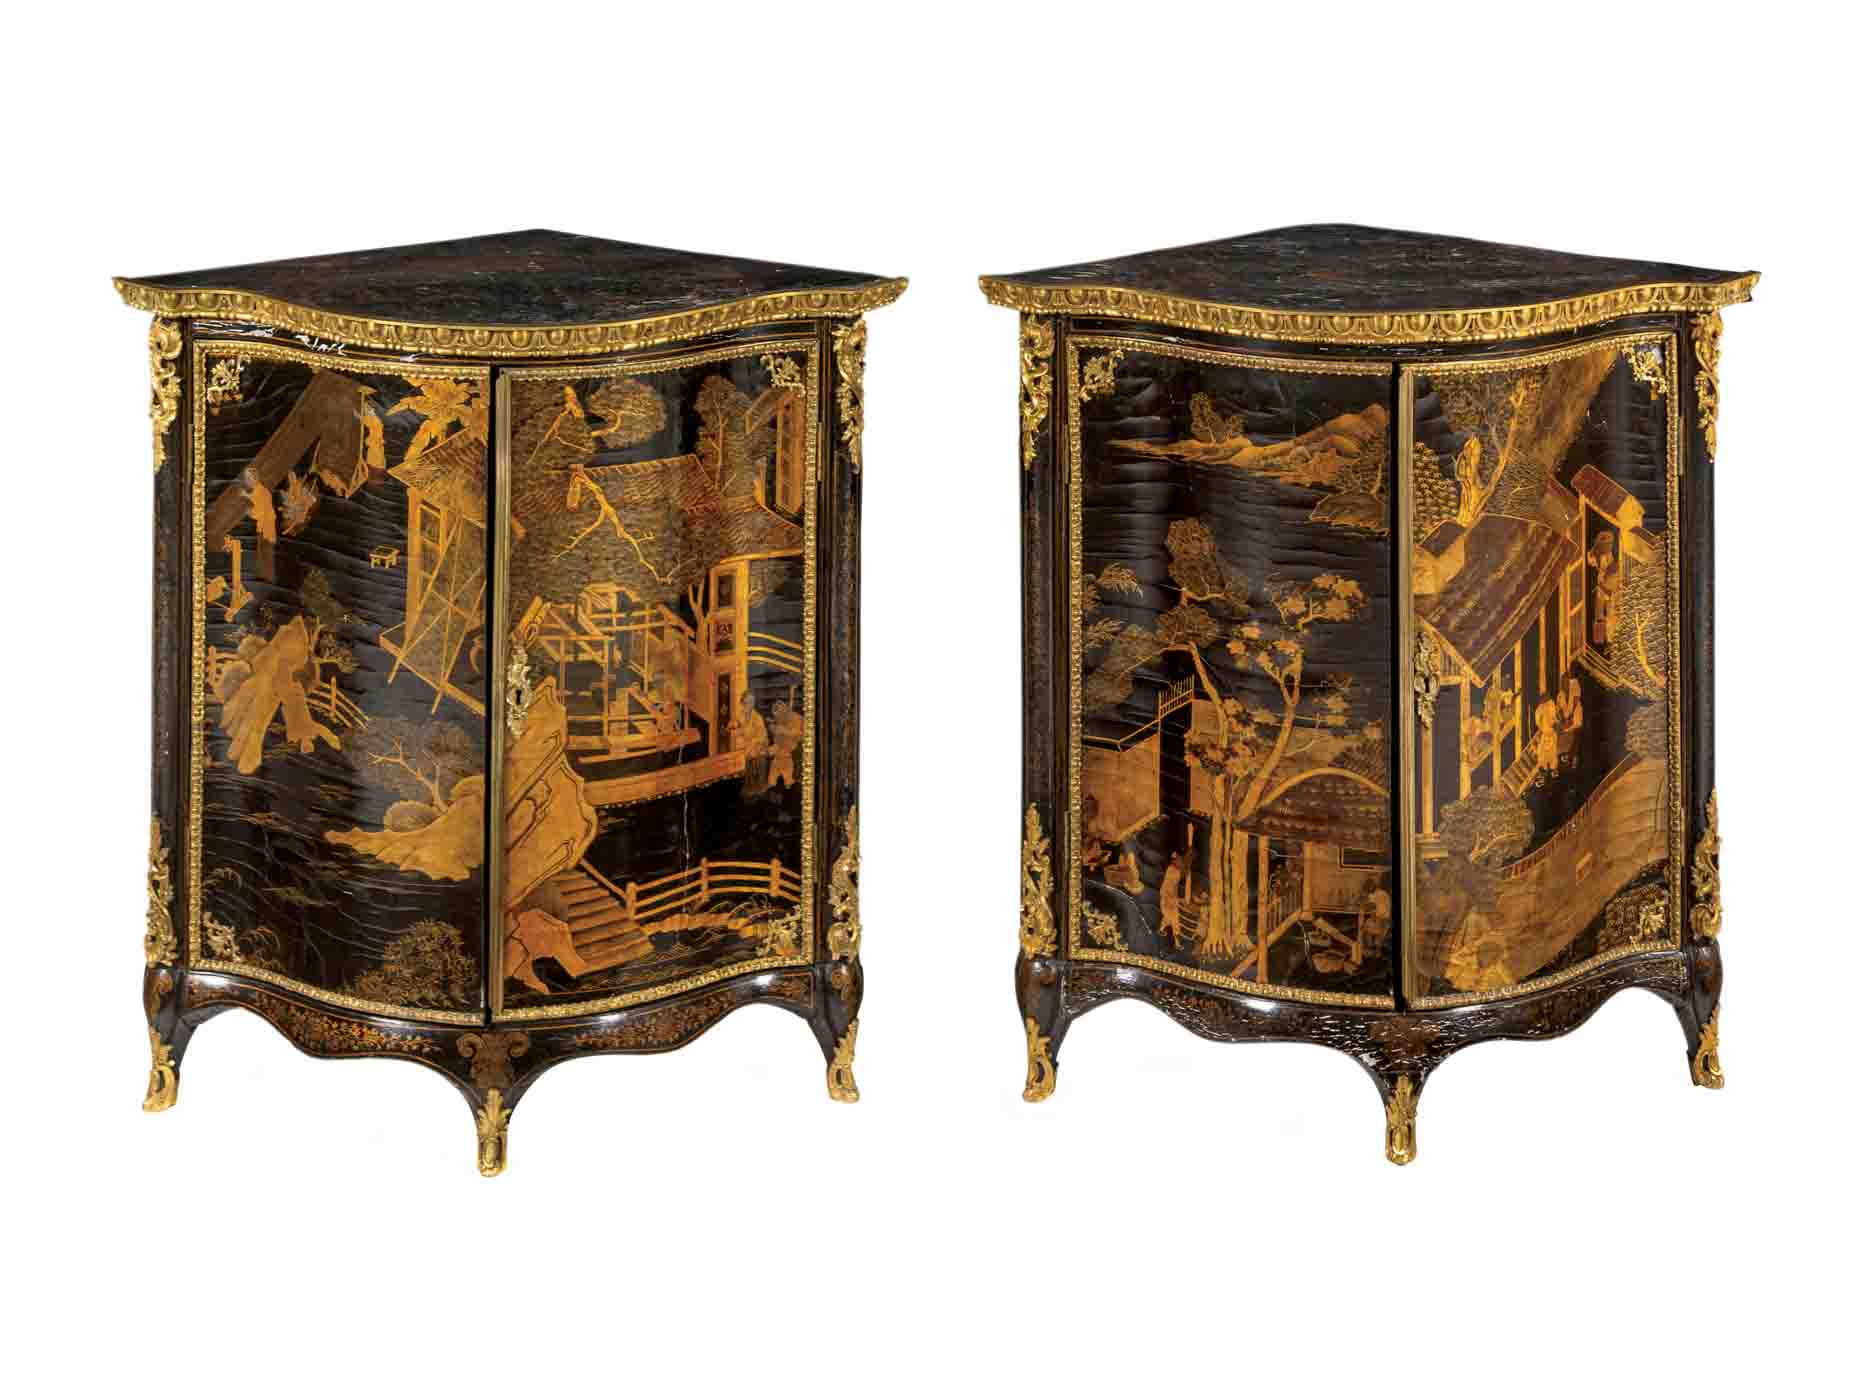 102 Sr2023 03 131 Lot 76 A Matched Pair Of George Iii Gilt Bronze Mounted Lacquered Corner Cabinets Attributed To Pierre Langlois